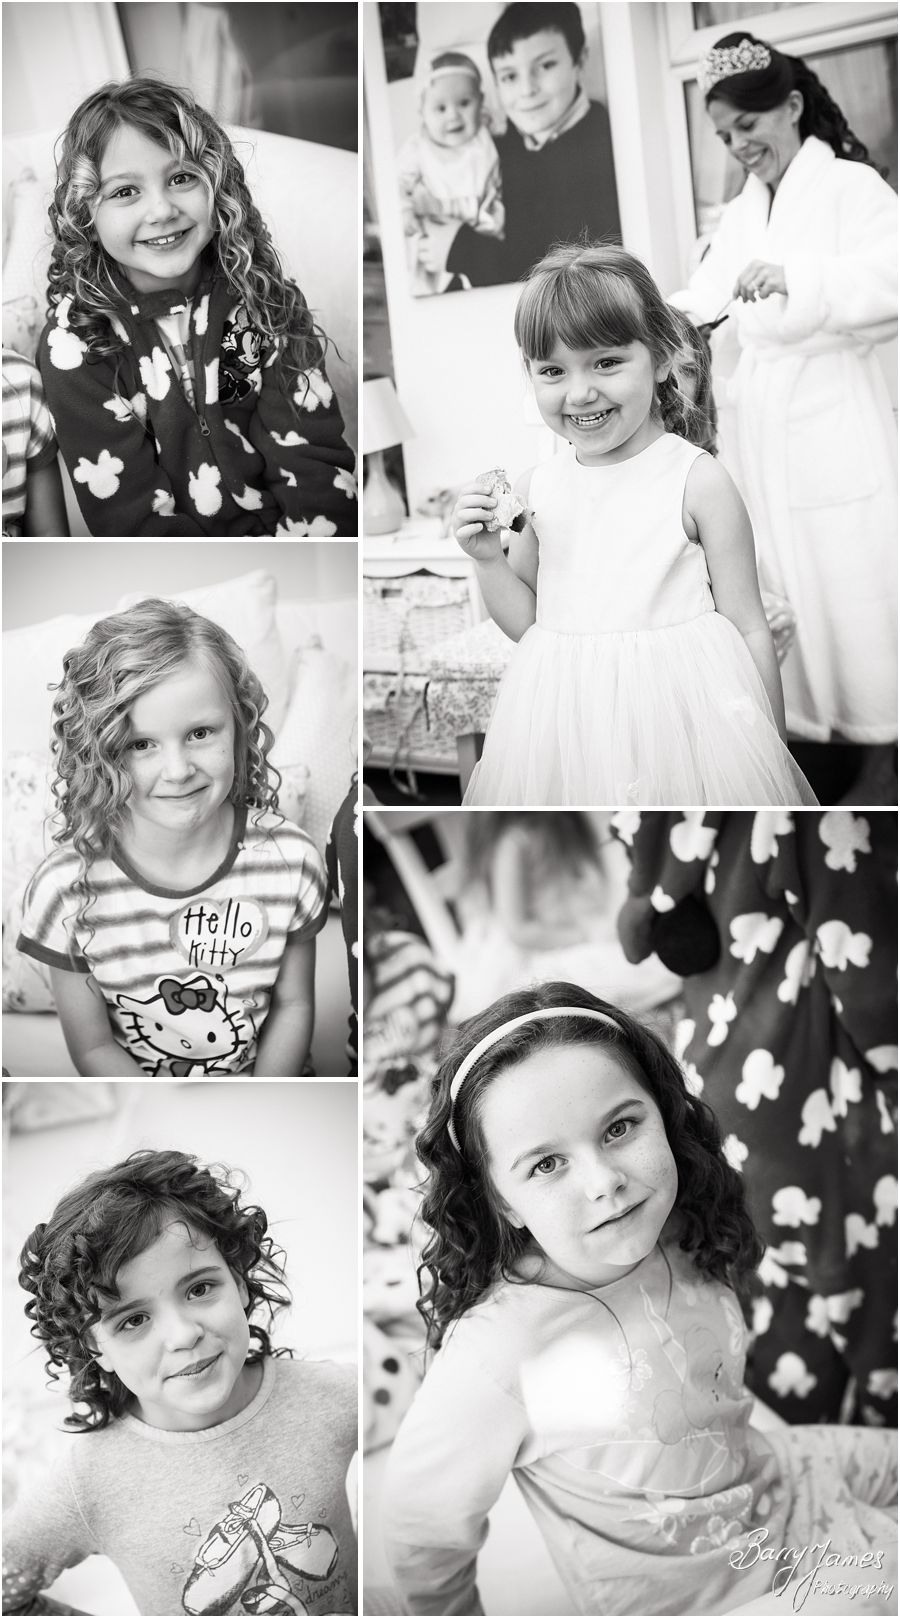 Reportage wedding photographs at home in Brewood by Stafford Wedding Photographer Barry James